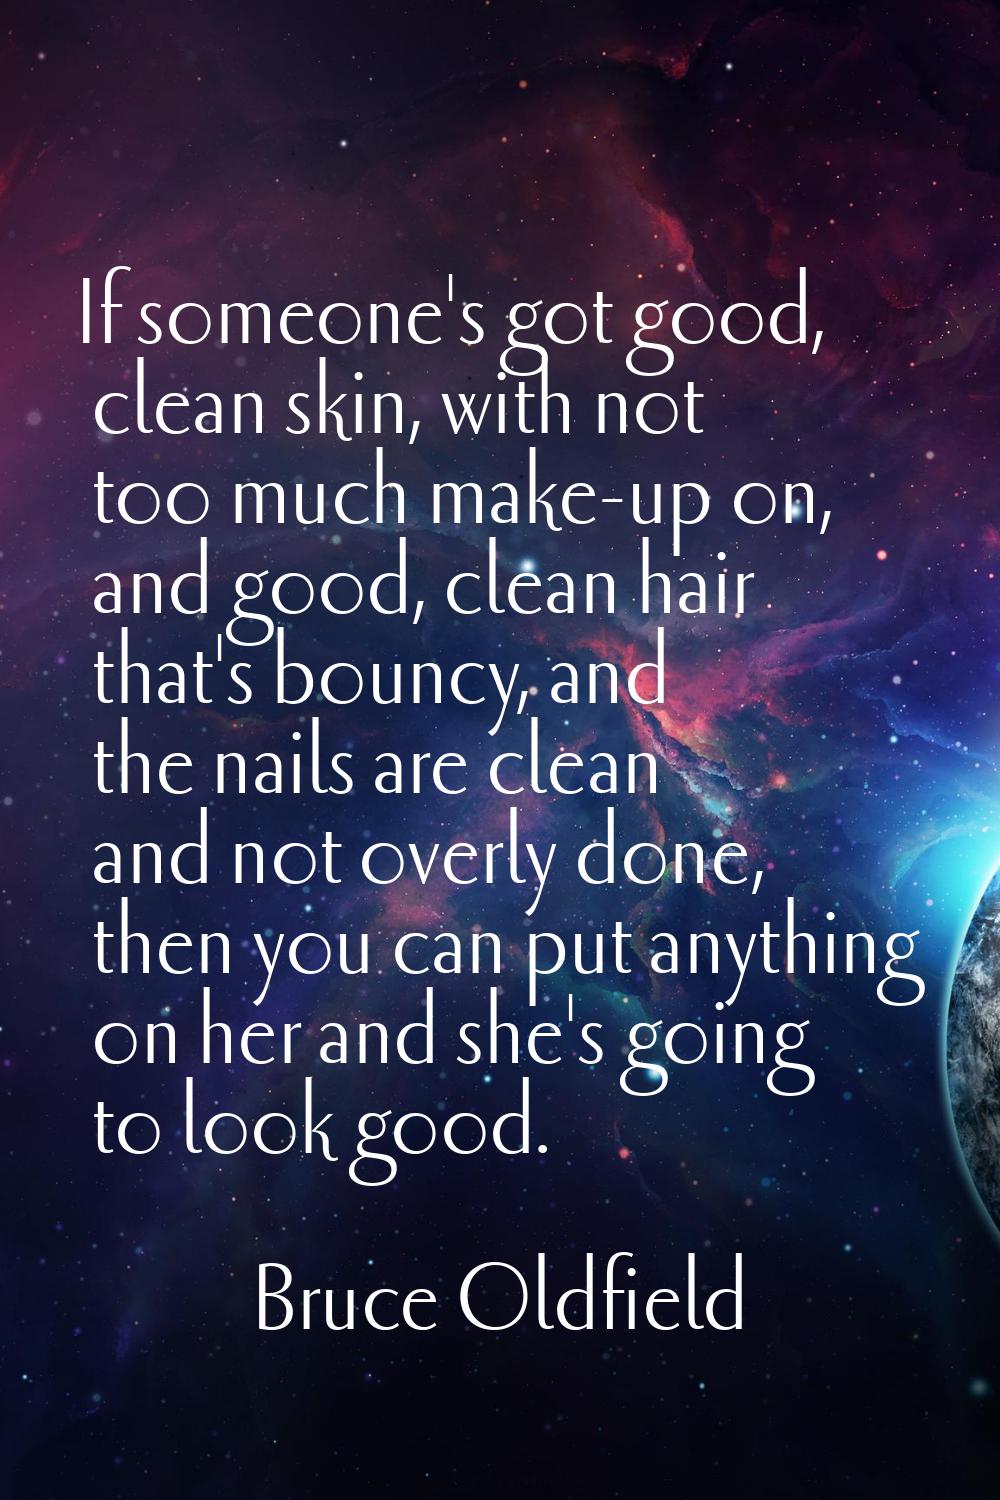 If someone's got good, clean skin, with not too much make-up on, and good, clean hair that's bouncy